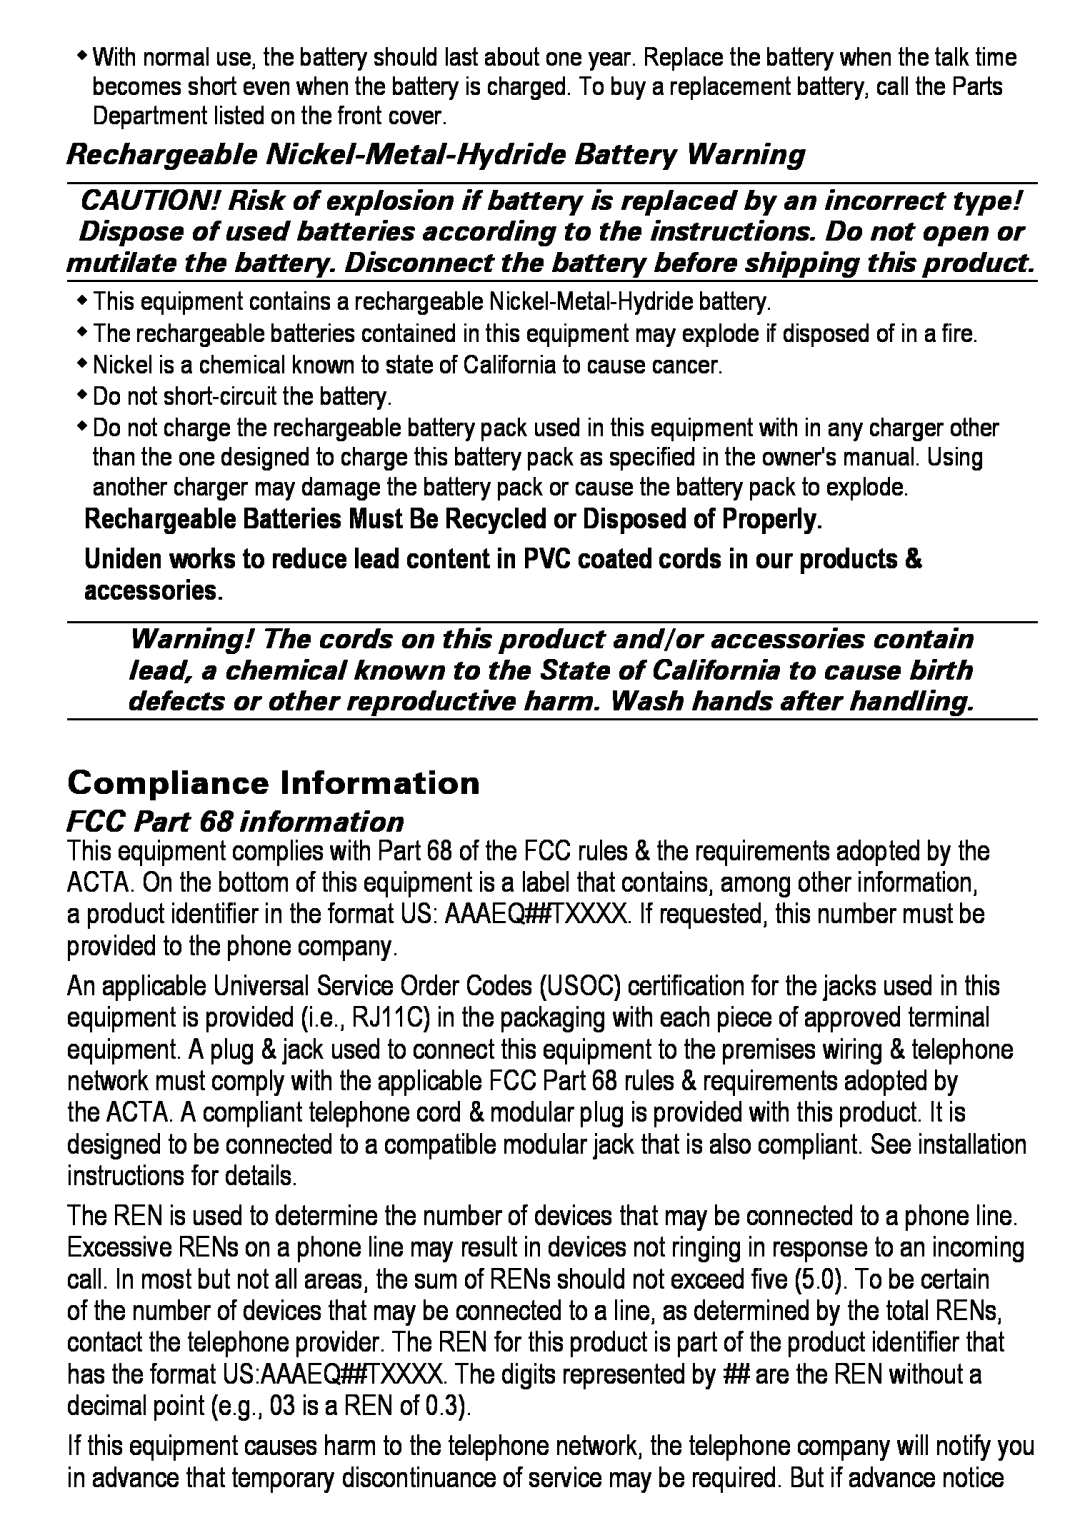 Uniden DECT4086-4 manual Compliance Information, Rechargeable Nickel-Metal-Hydride Battery Warning, FCC Part 68 information 